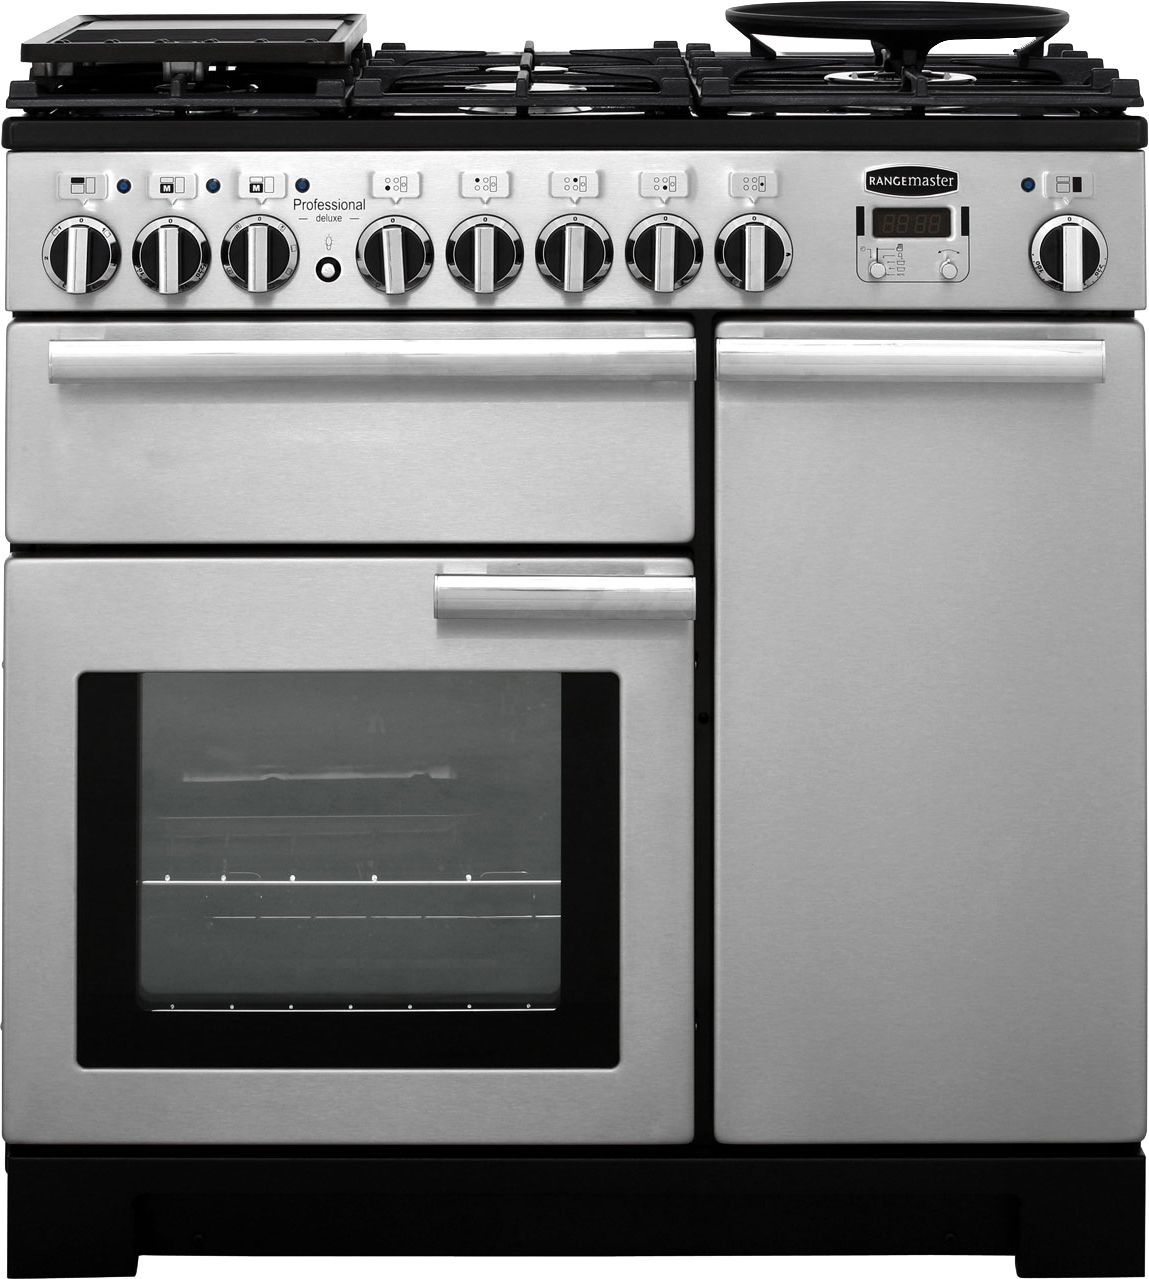 Rangemaster Professional Deluxe PDL90DFFSS/C 90cm Dual Fuel Range Cooker - Stainless Steel - A/A Rated, Stainless Steel